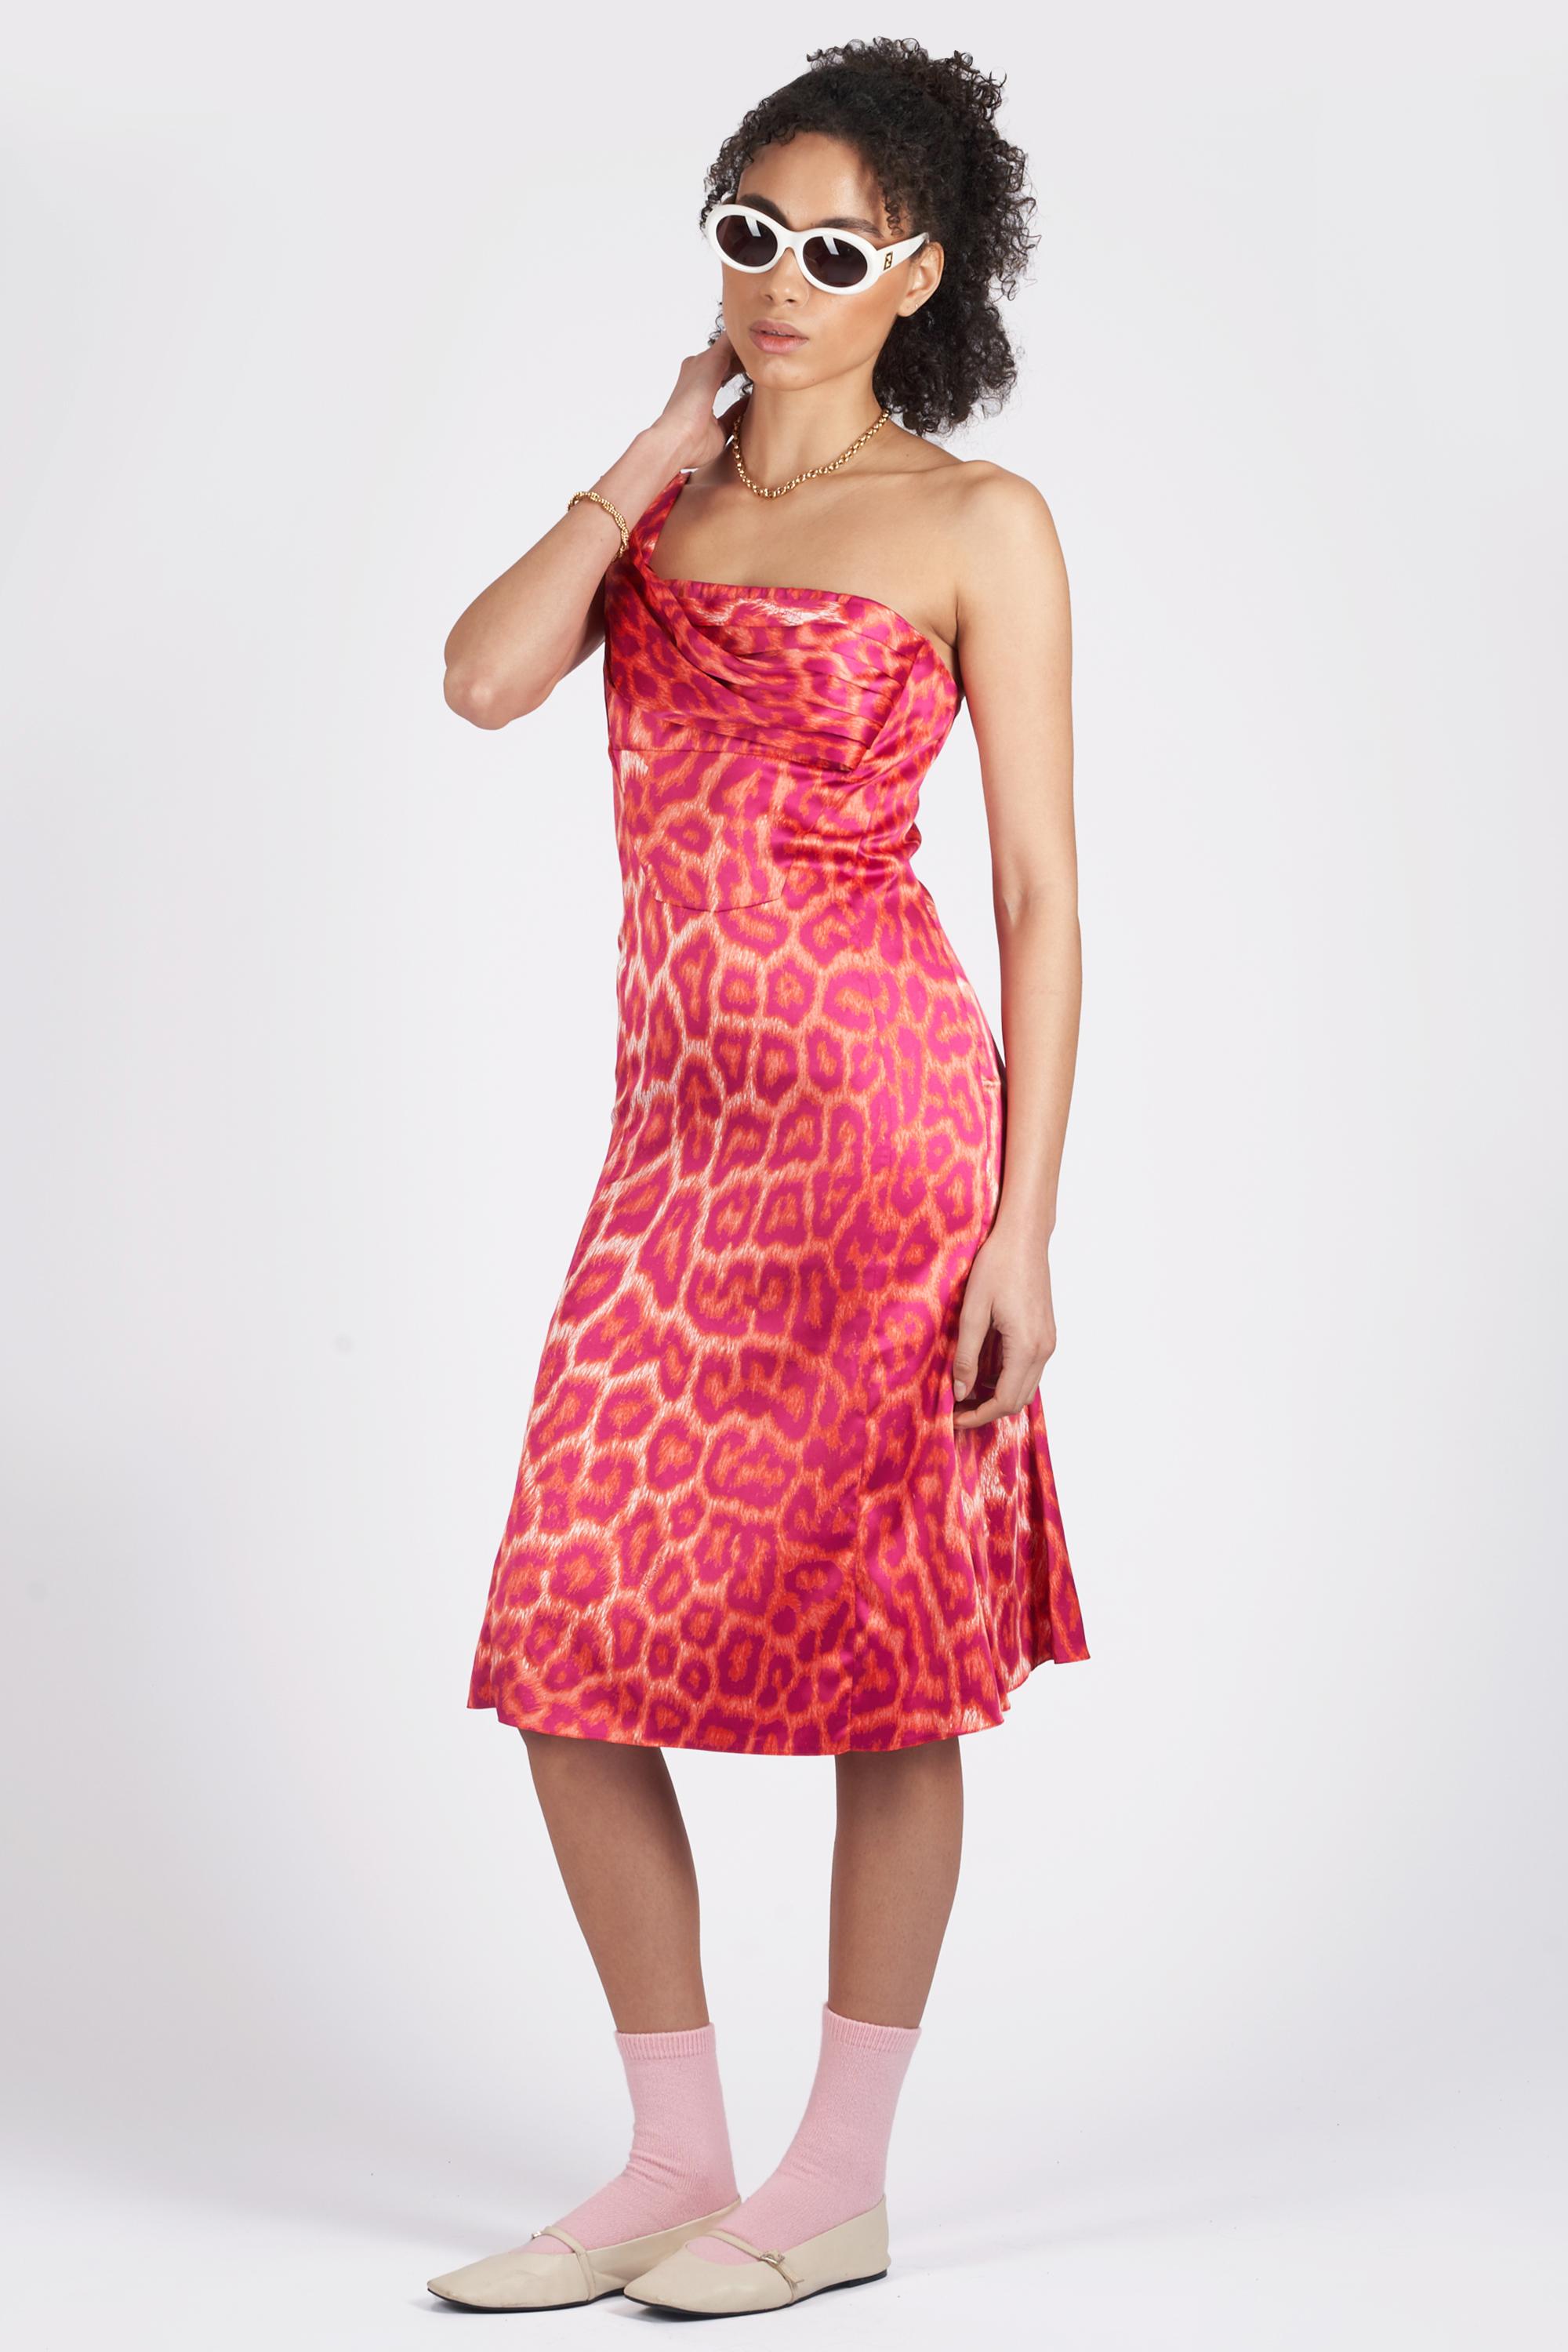 S/S 2008 Leopard Print One Shoulder Dress In Excellent Condition For Sale In London, GB